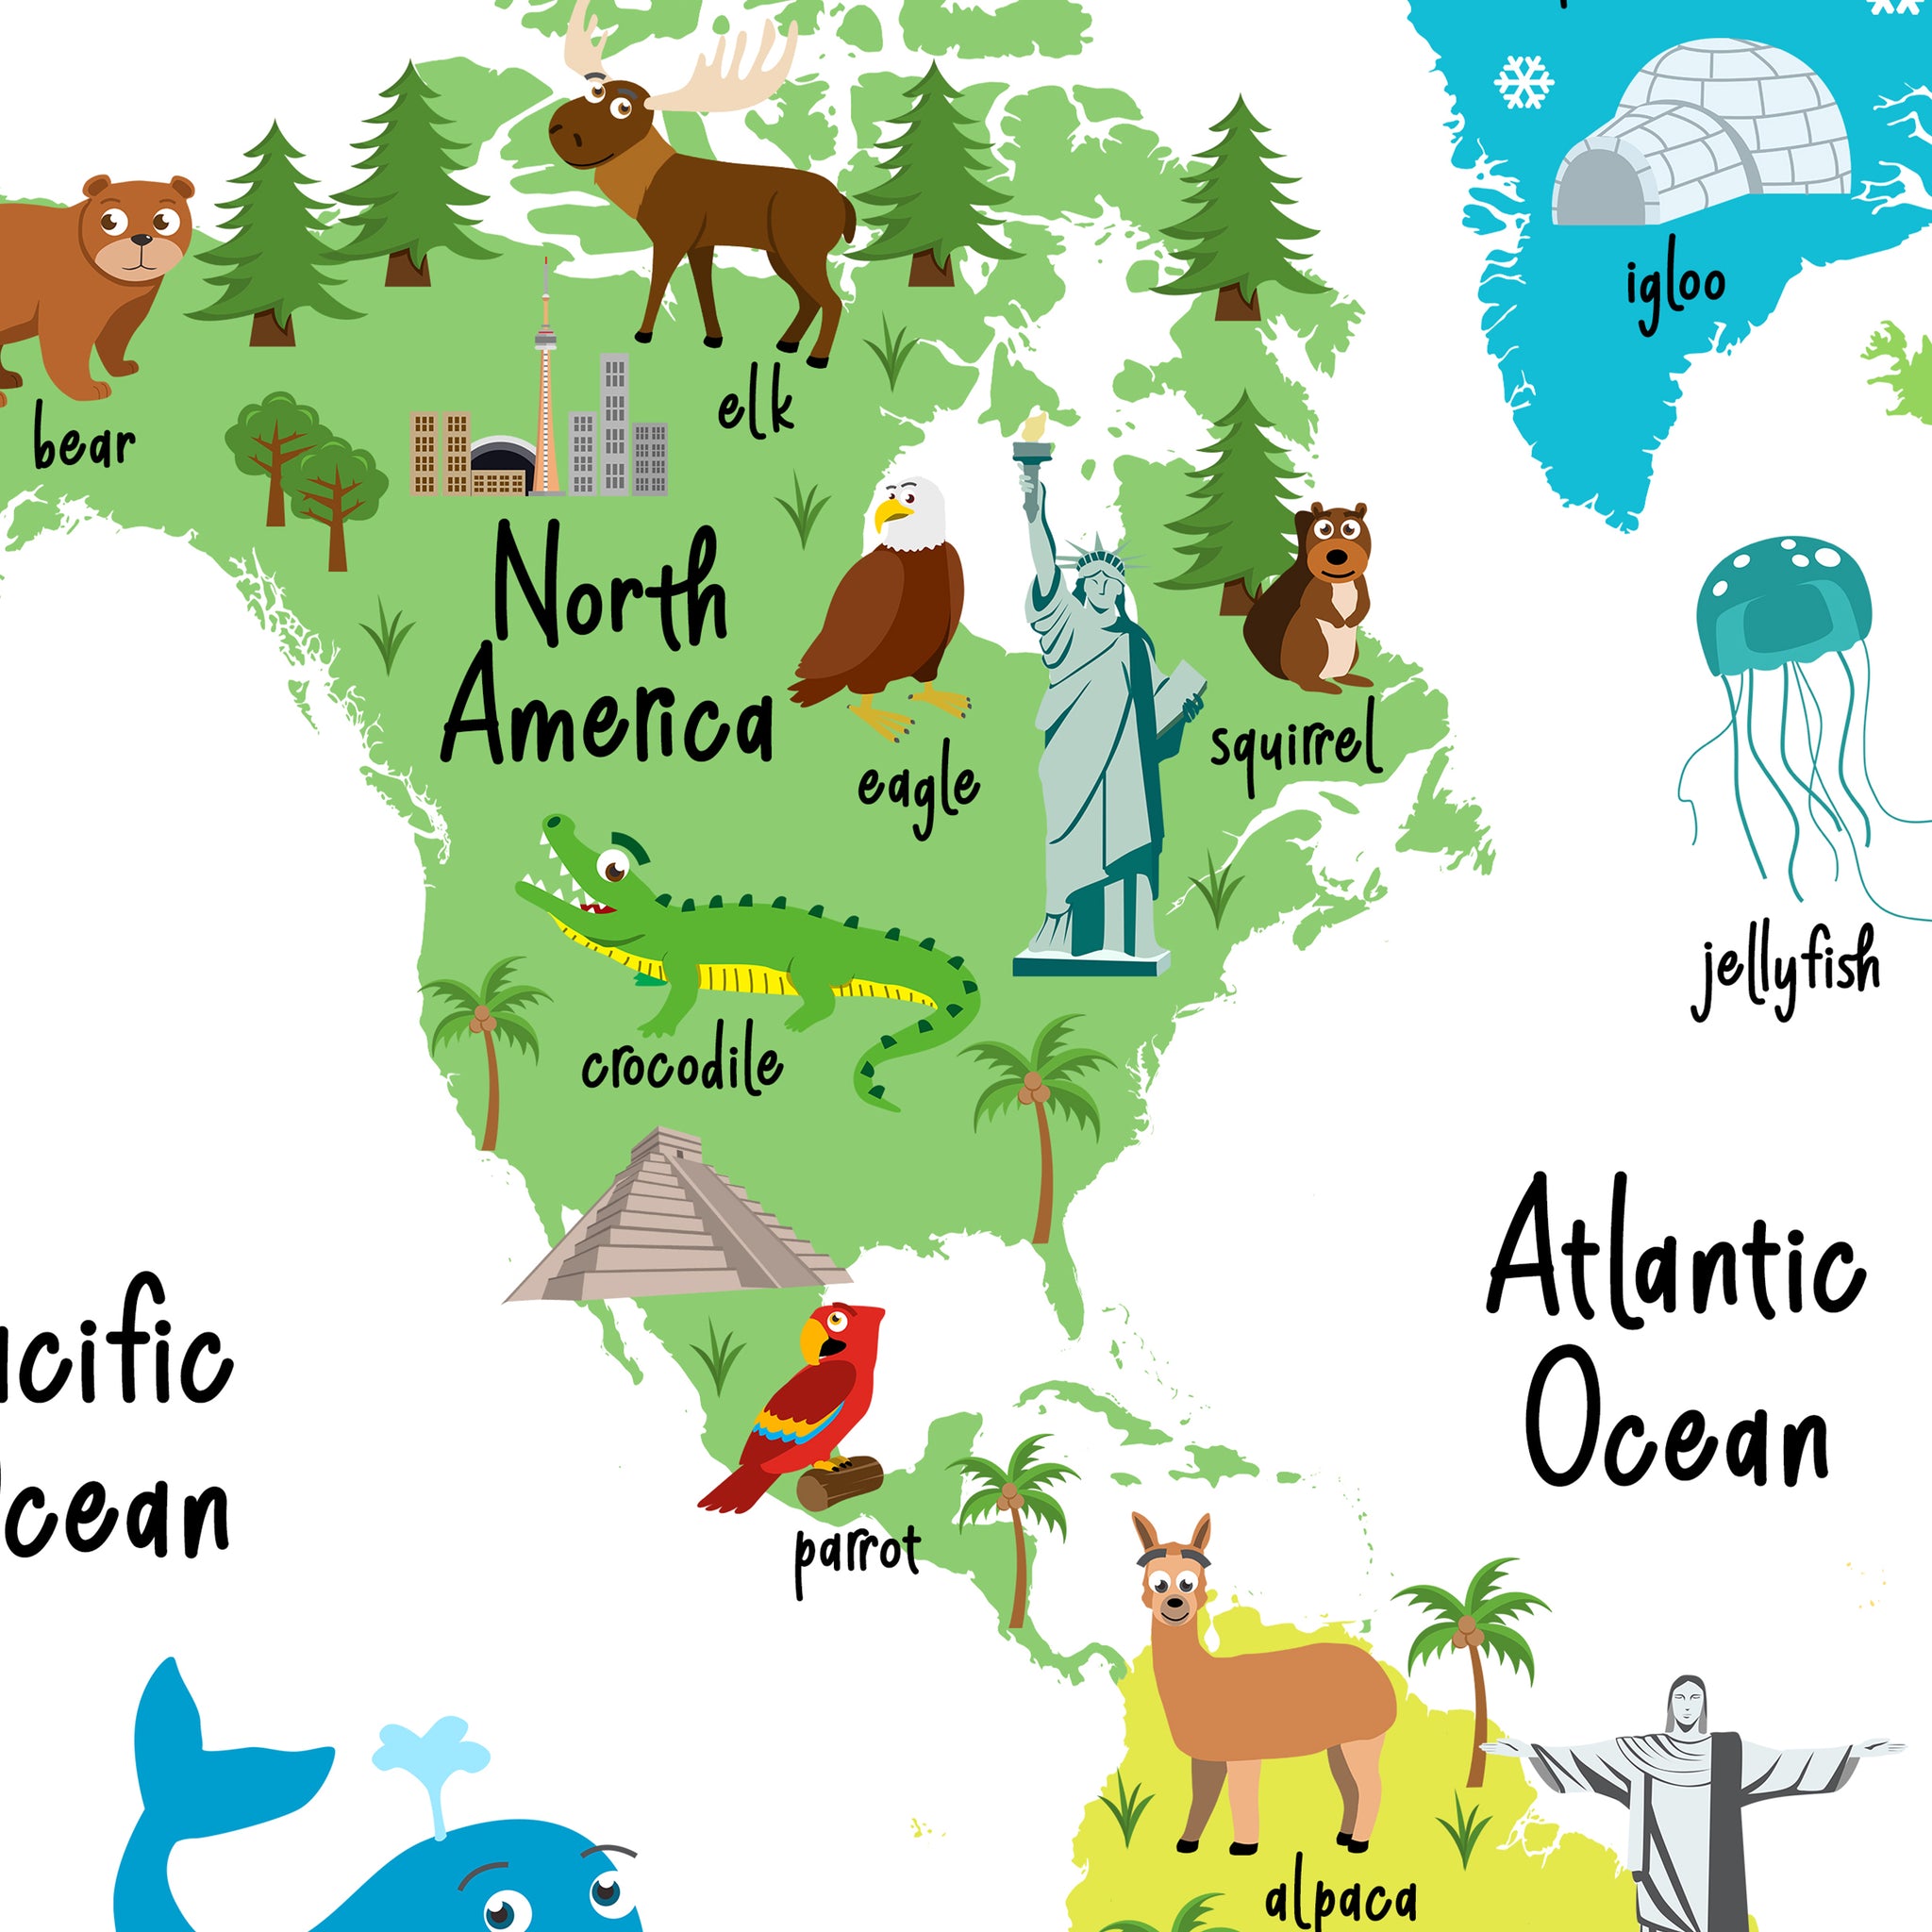 Colorful Children's Animal World Map Poster - 18x24 inches